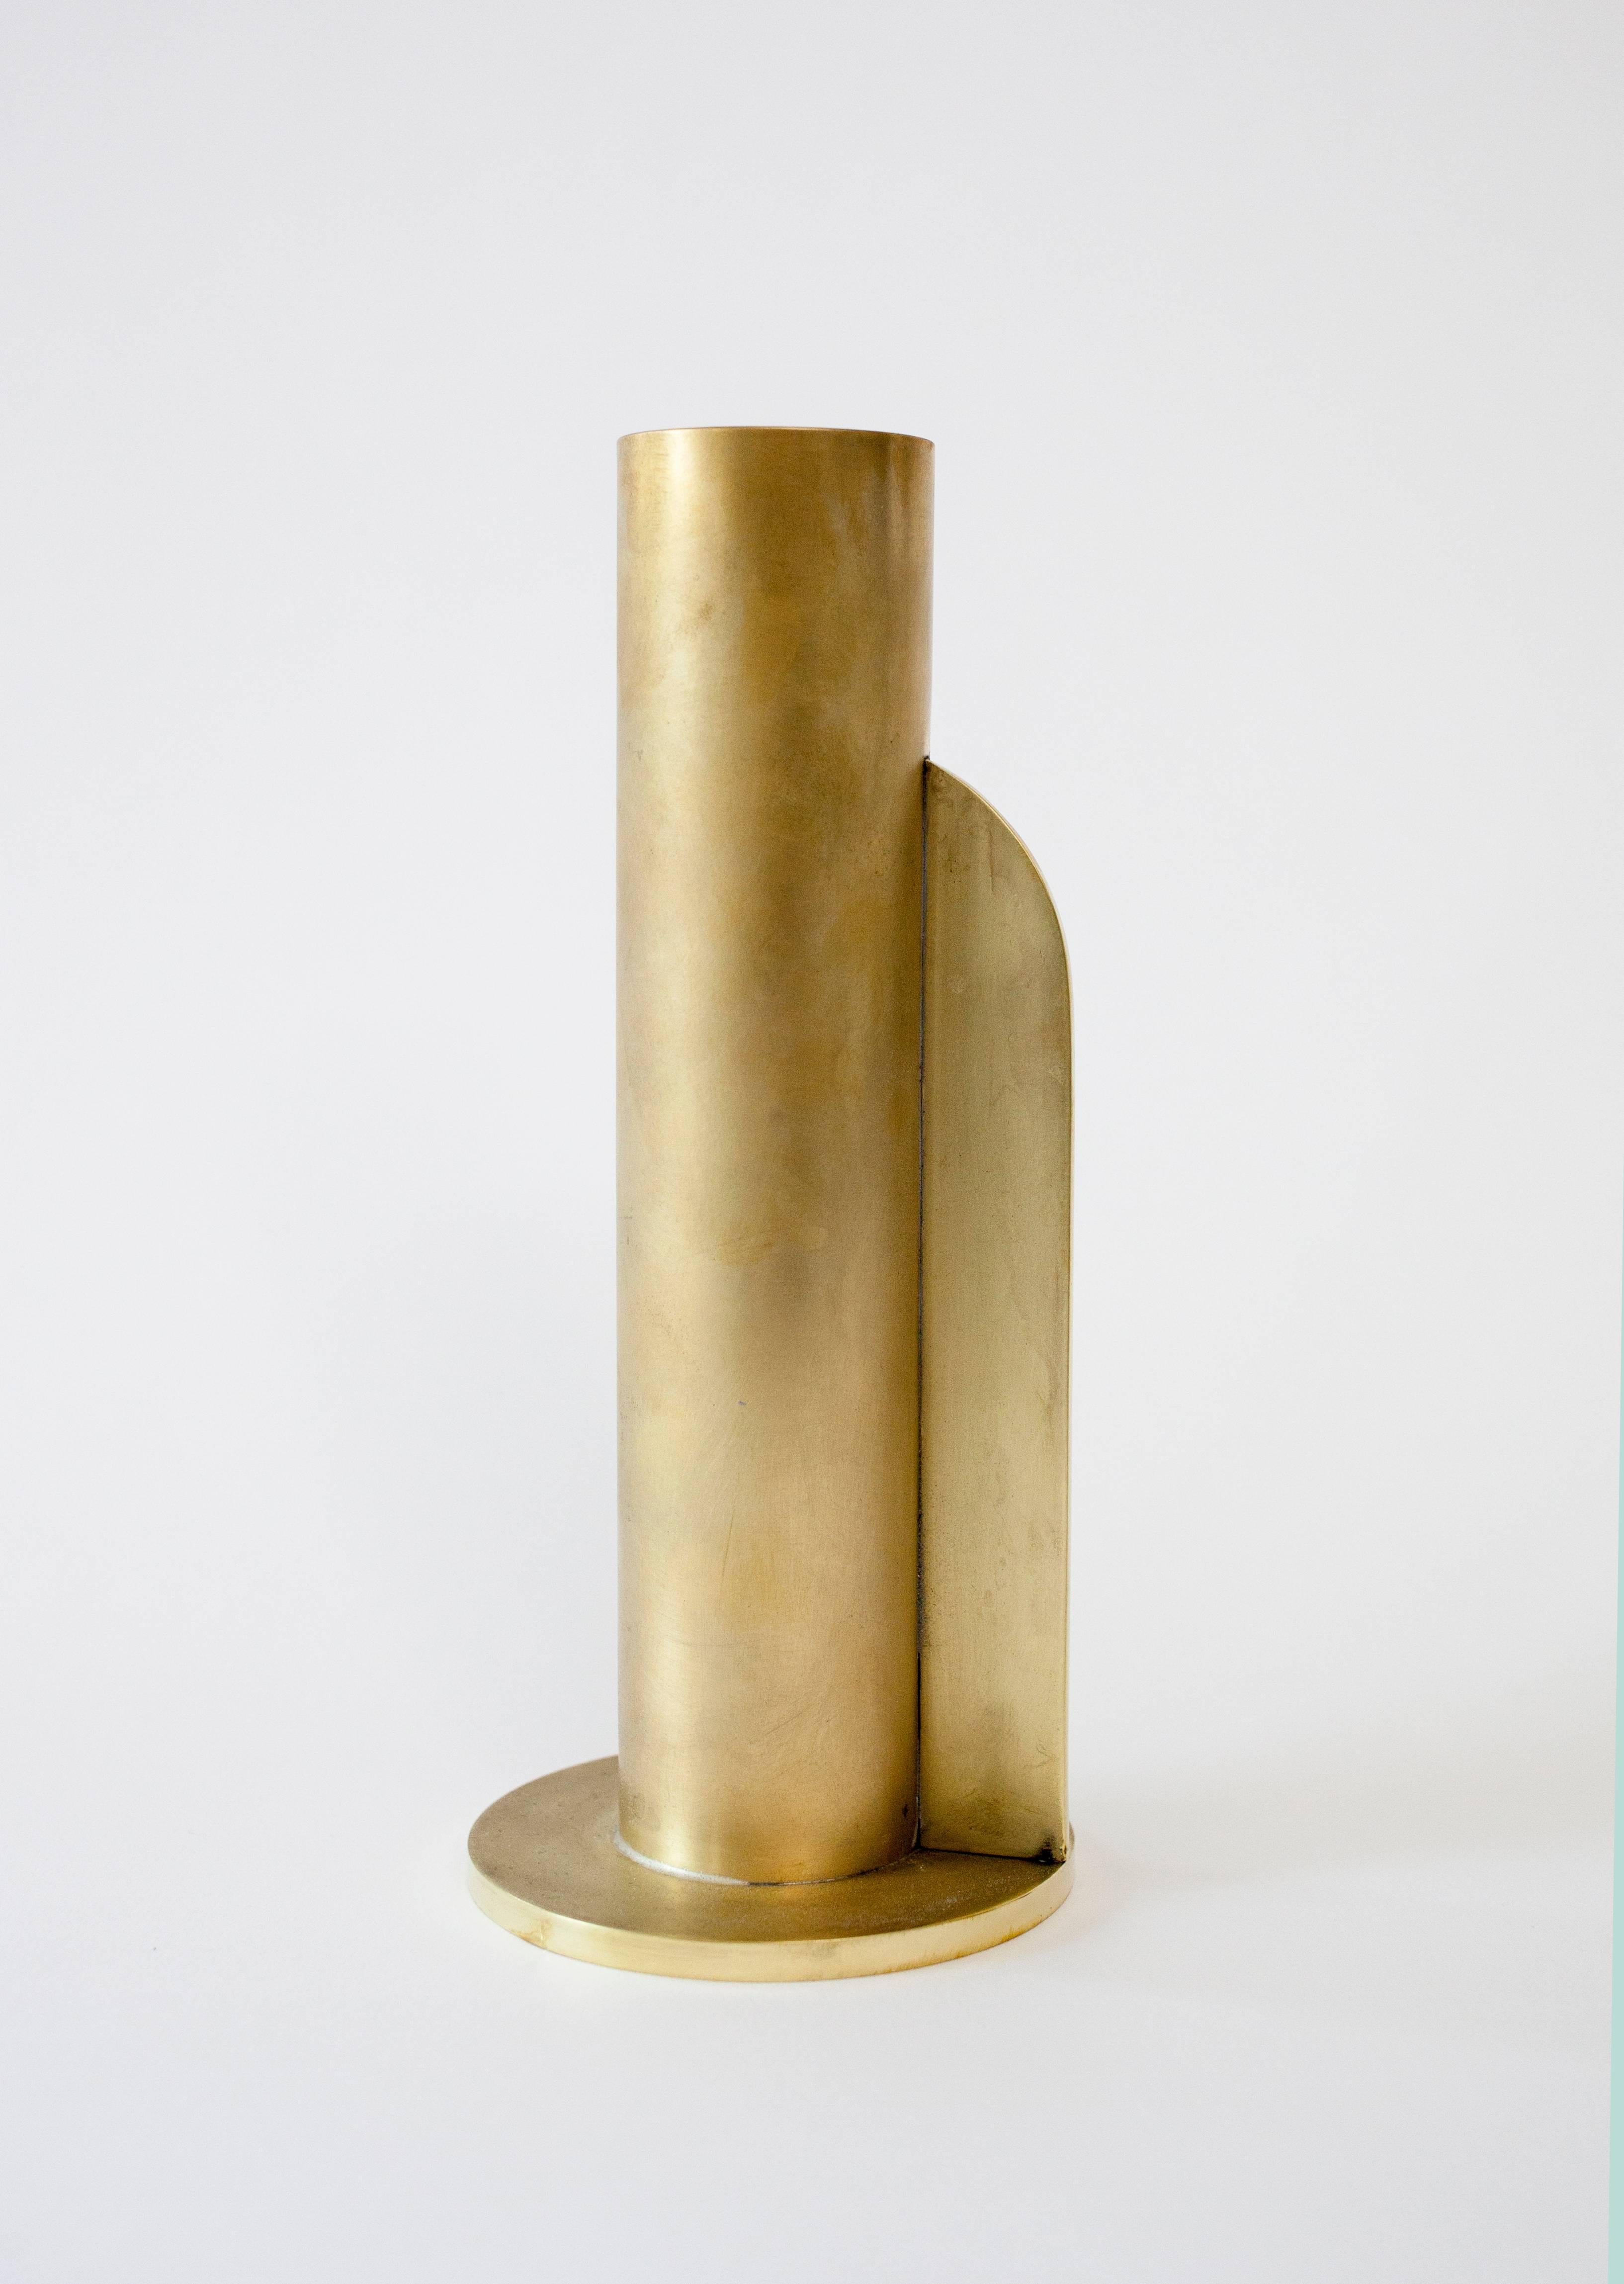 Blackened Contemporary 001 Vase in Brass by Orphan Work For Sale